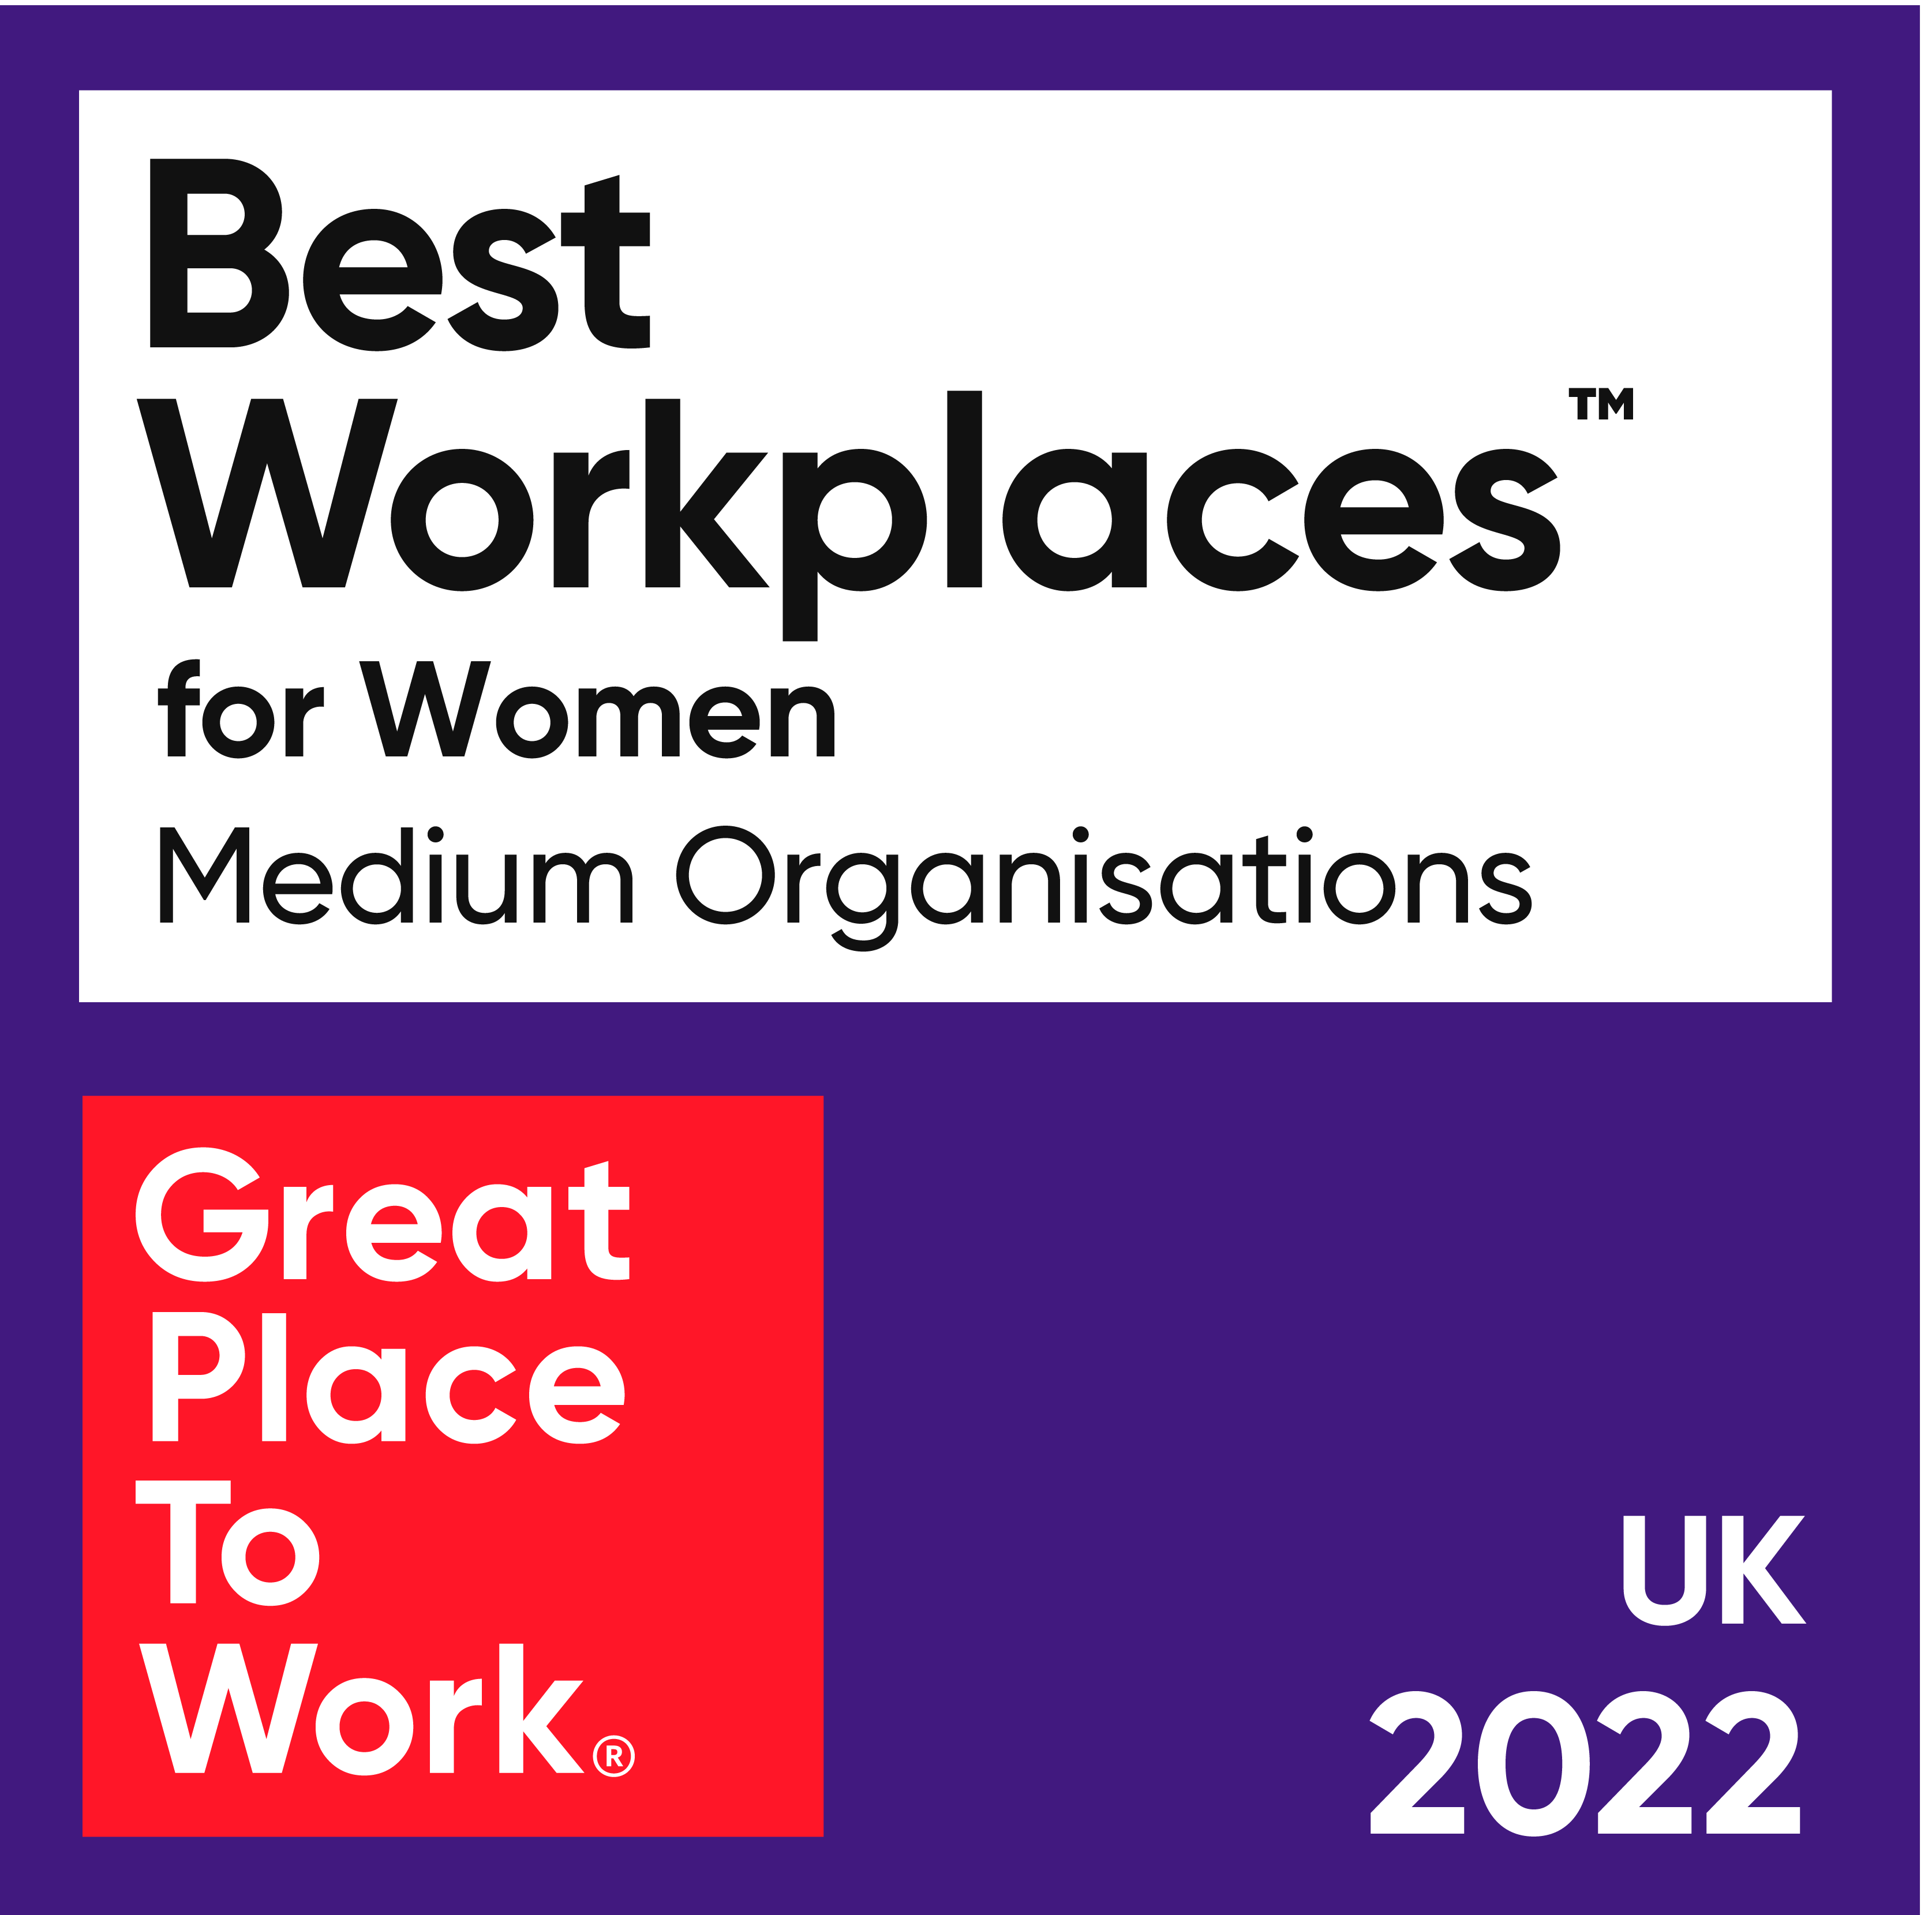 Best workplaces for women 2022 logo